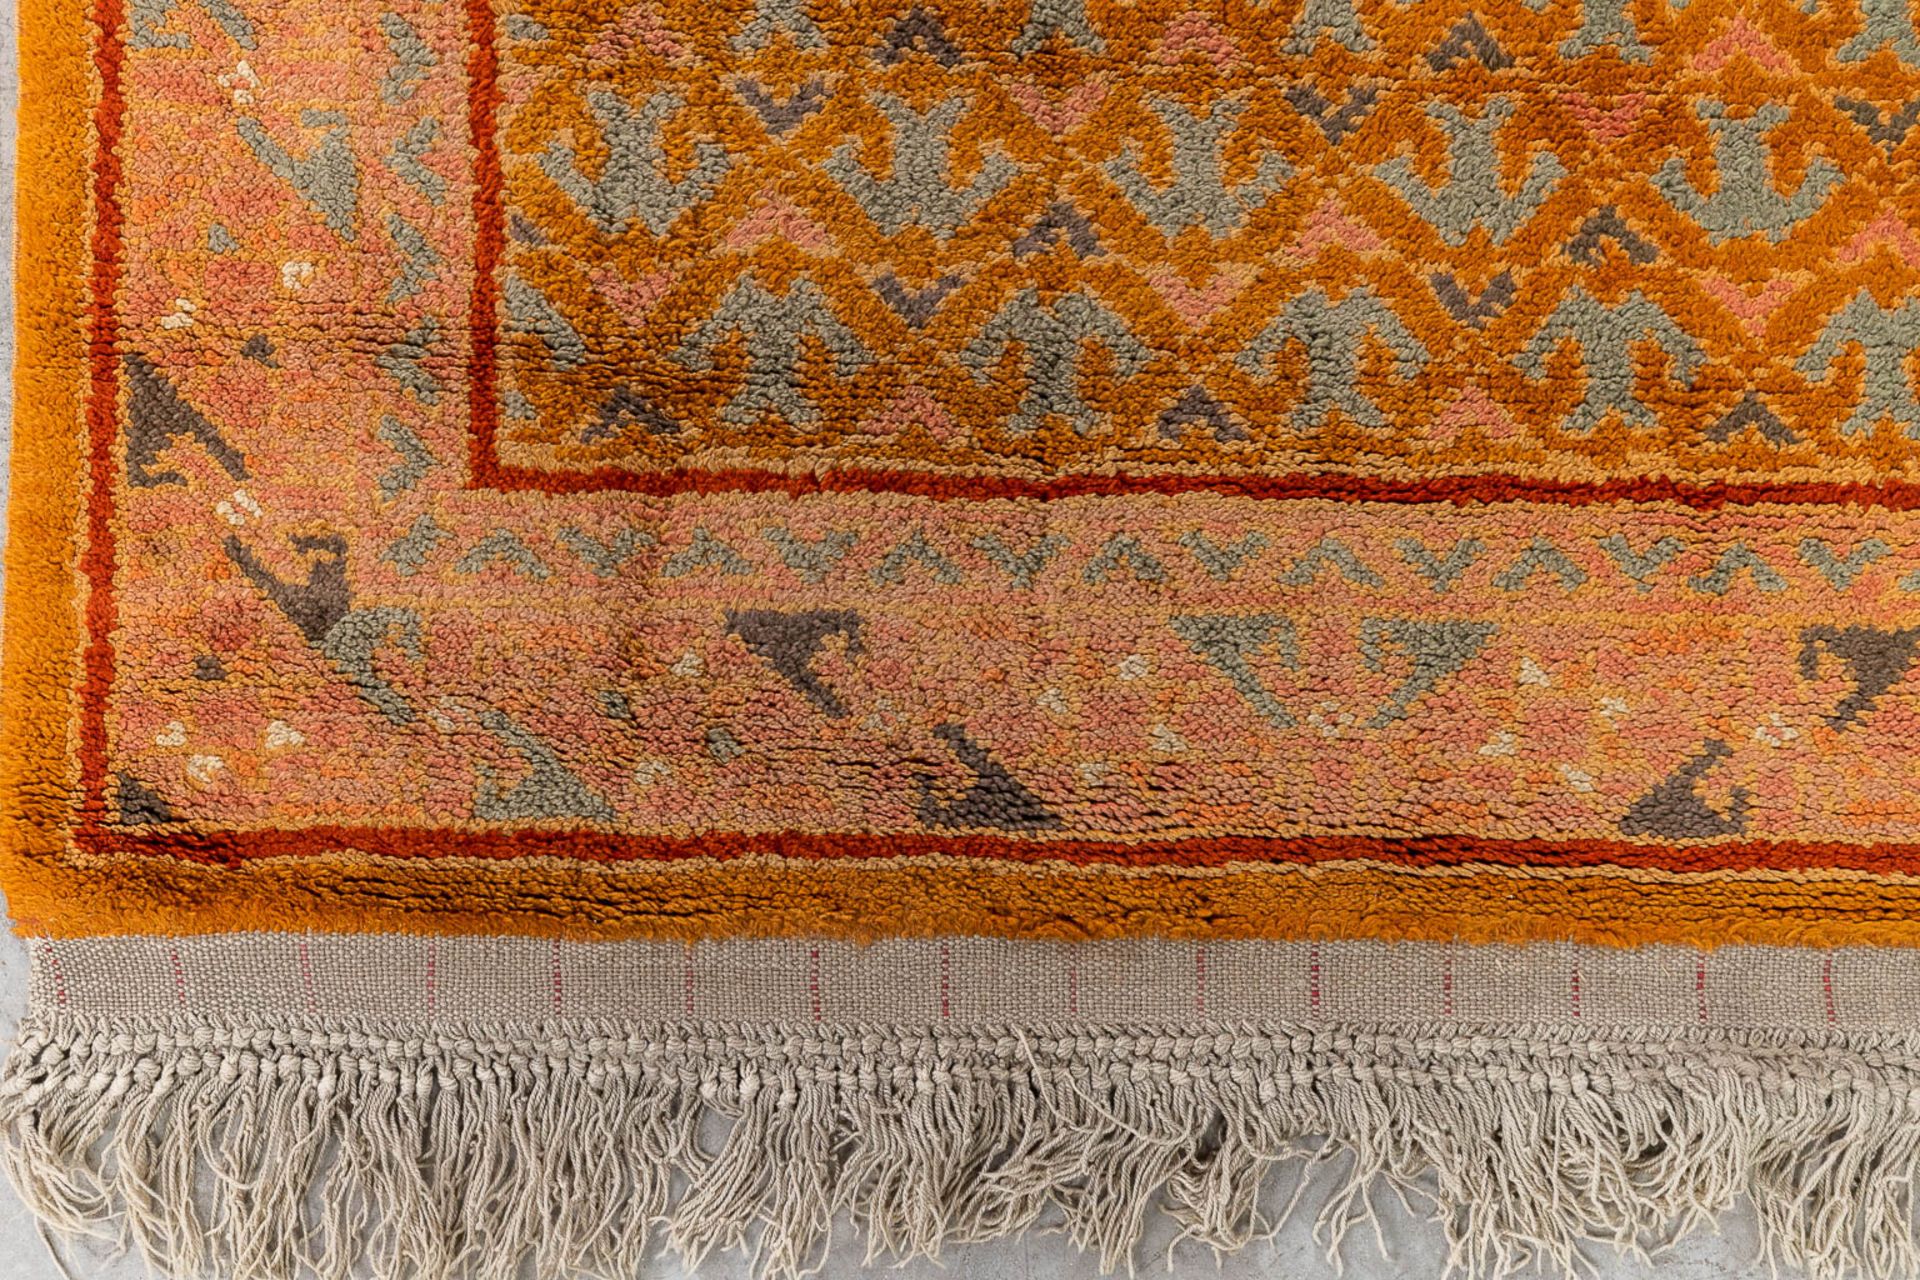 A collection of 3 Oriental hand-made carpets. Turkey. (L: 185 x W: 140 cm) - Image 8 of 11